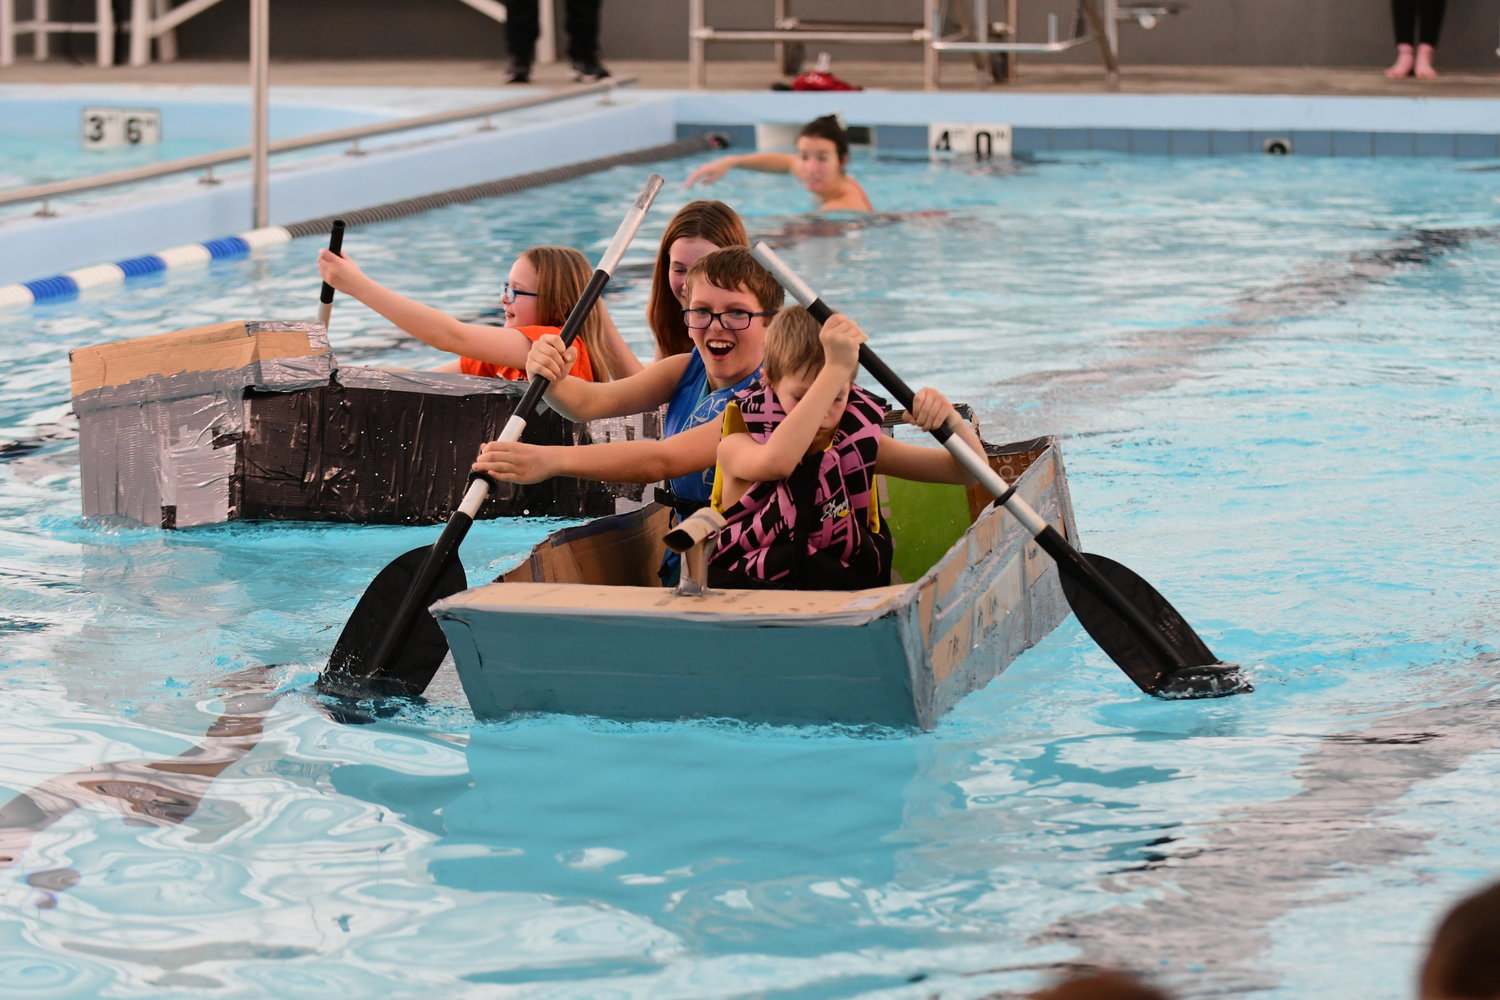 Photos from the 2022 Cardboard Boat Race, held Sunday, Jan. 23, at the Kirksville Aquatic Center.